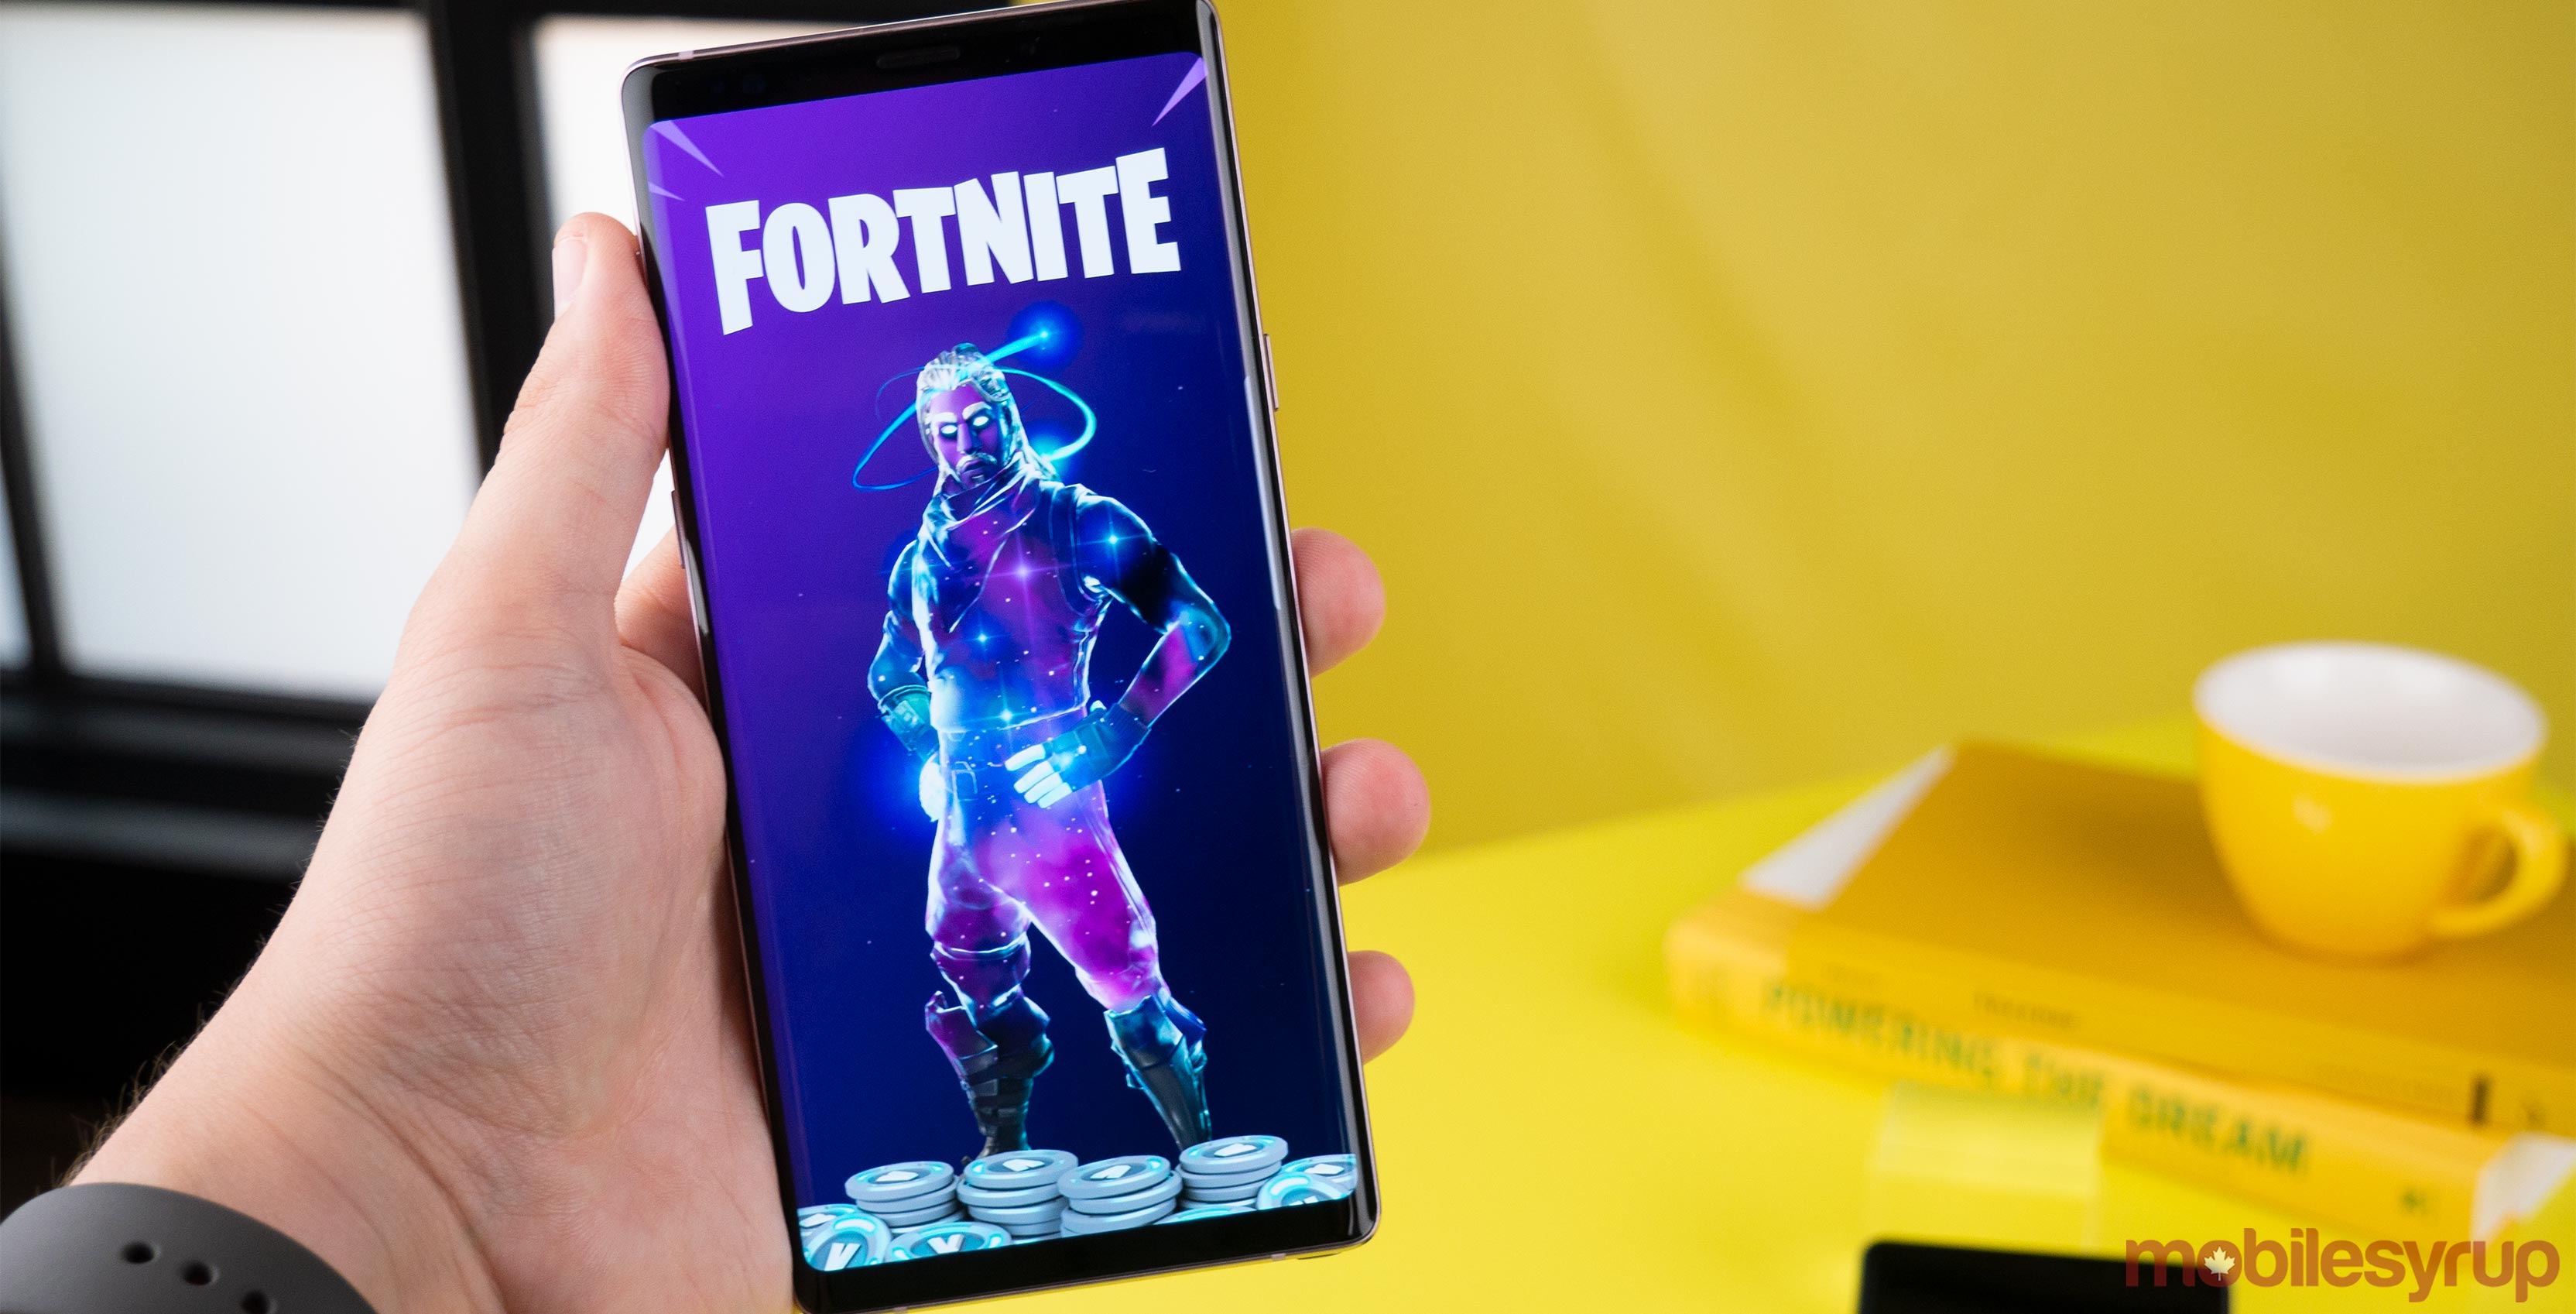 Fortnite Android Beta Is Now Available On Samsung Galaxy Devices